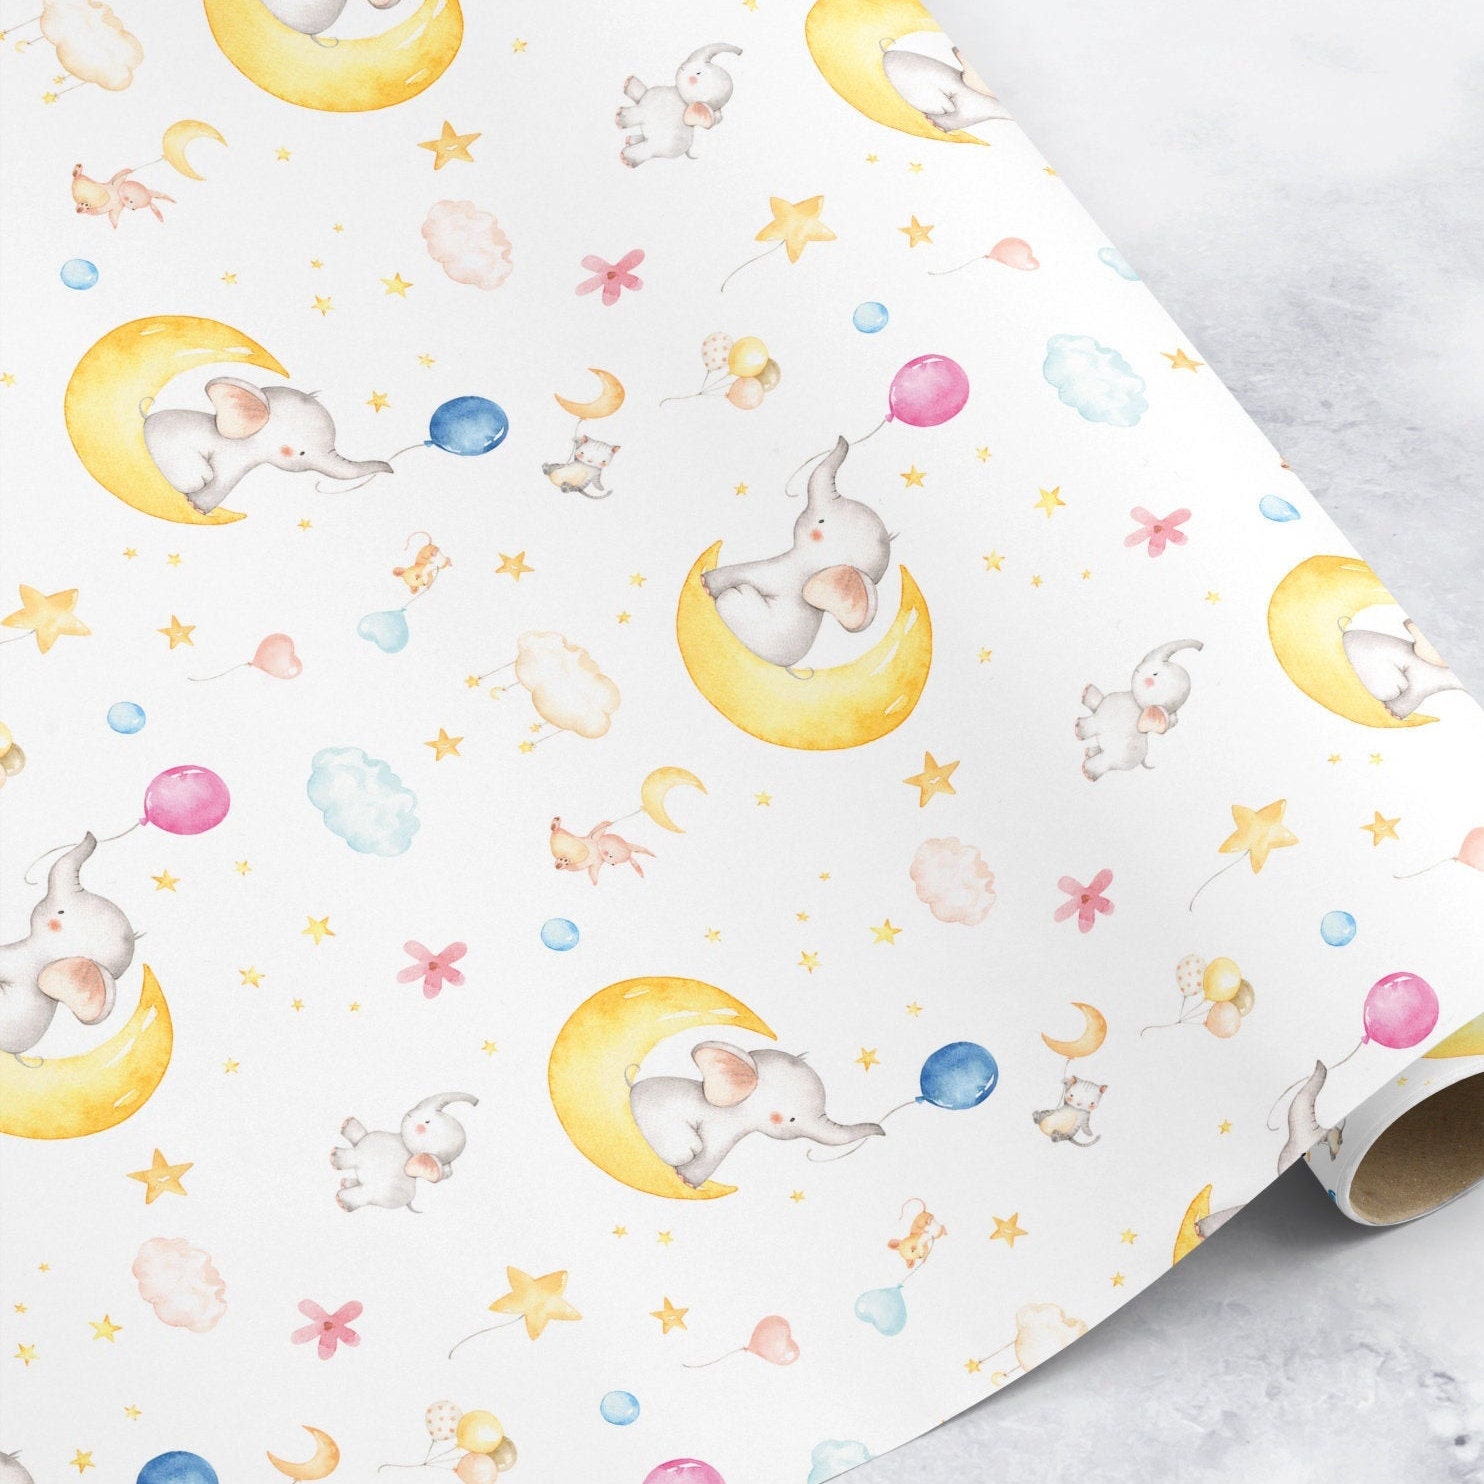 Kids 1st Birthday Wrapping Paper in Pink, 1st Birthday Baby Girl